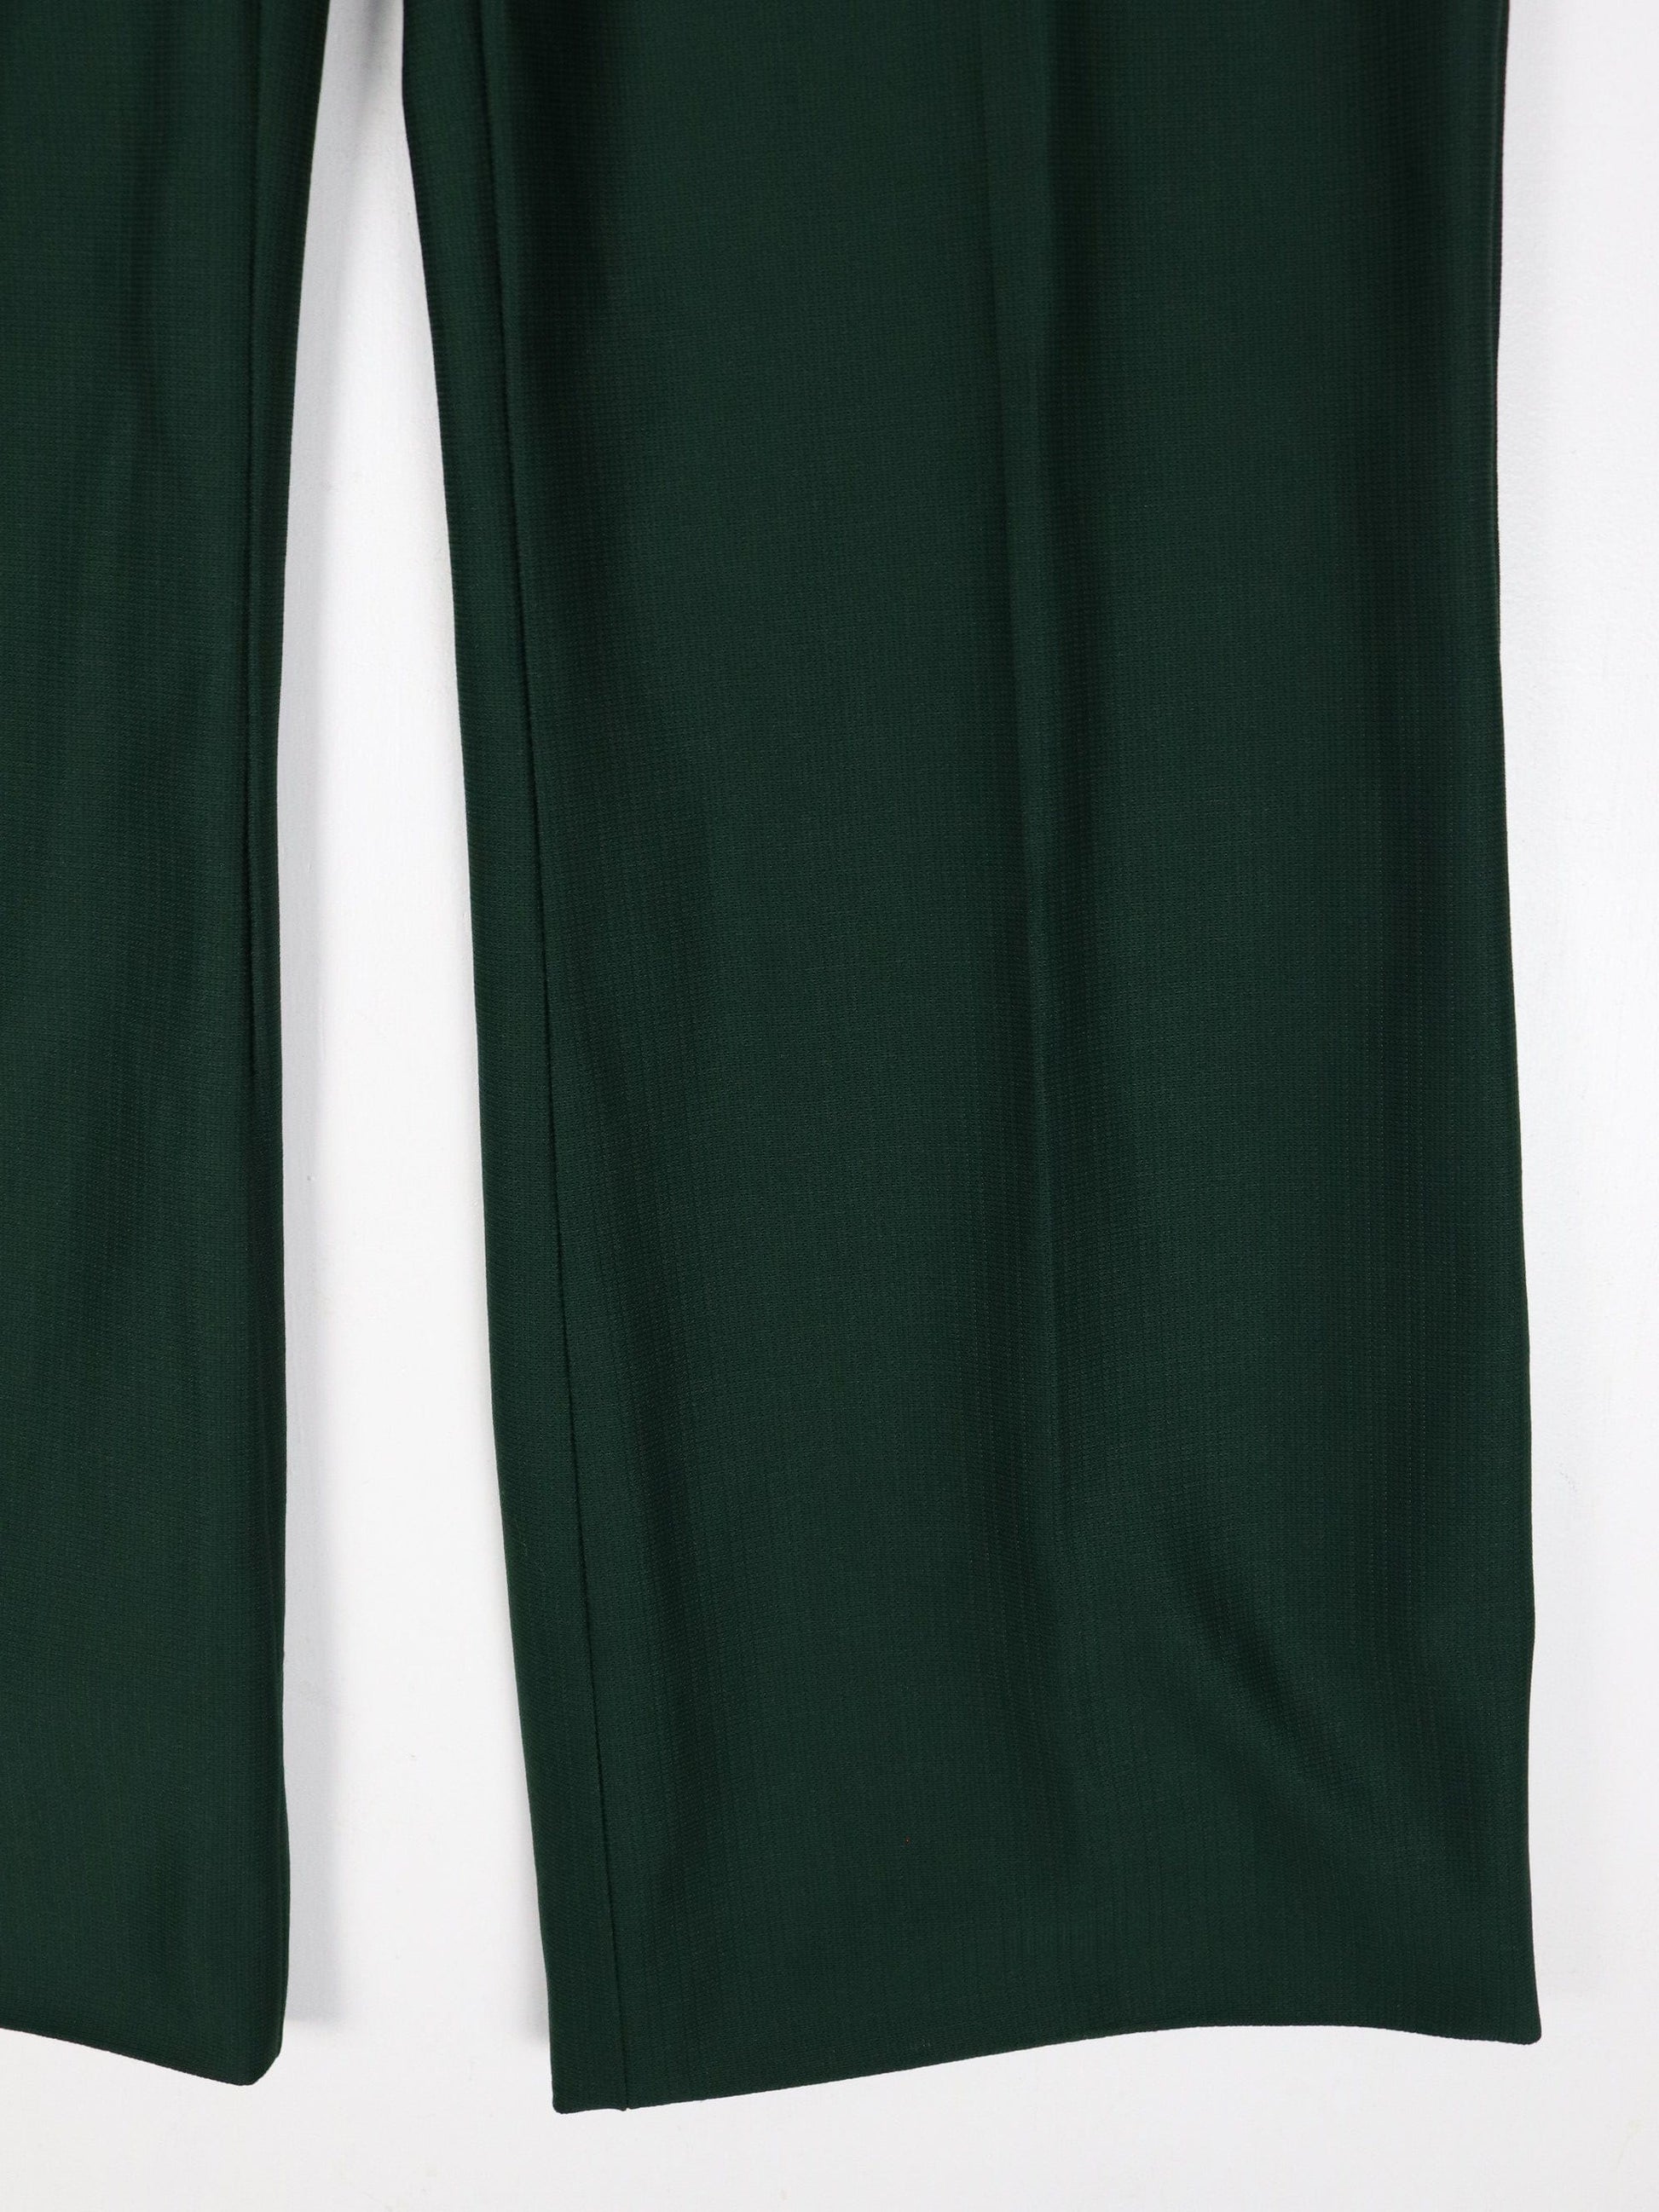 Other Pants Vintage Dress Pants Mens 36 x 33 Green Pleated Trousers 70s 80s Flare